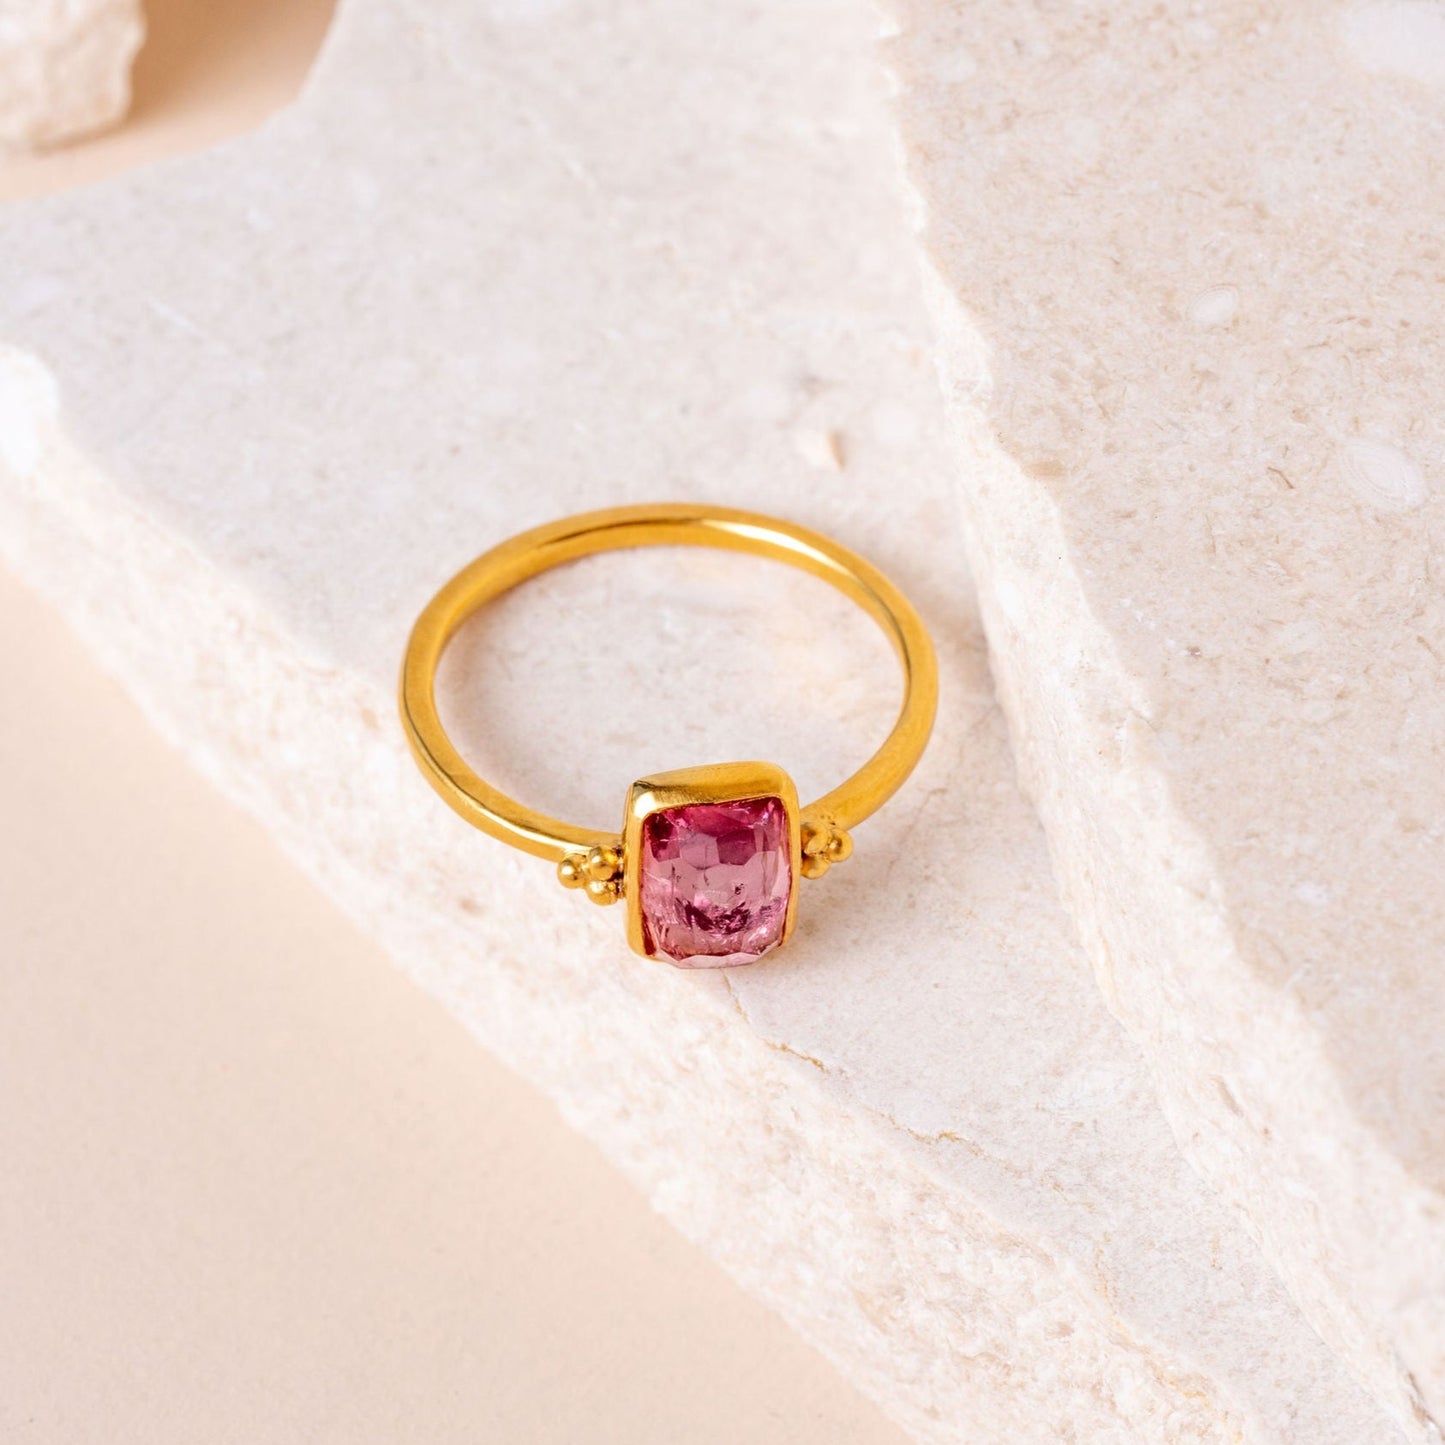 Handmade gold ring with delicate granulation framing a captivating pink tourmaline gemstone.